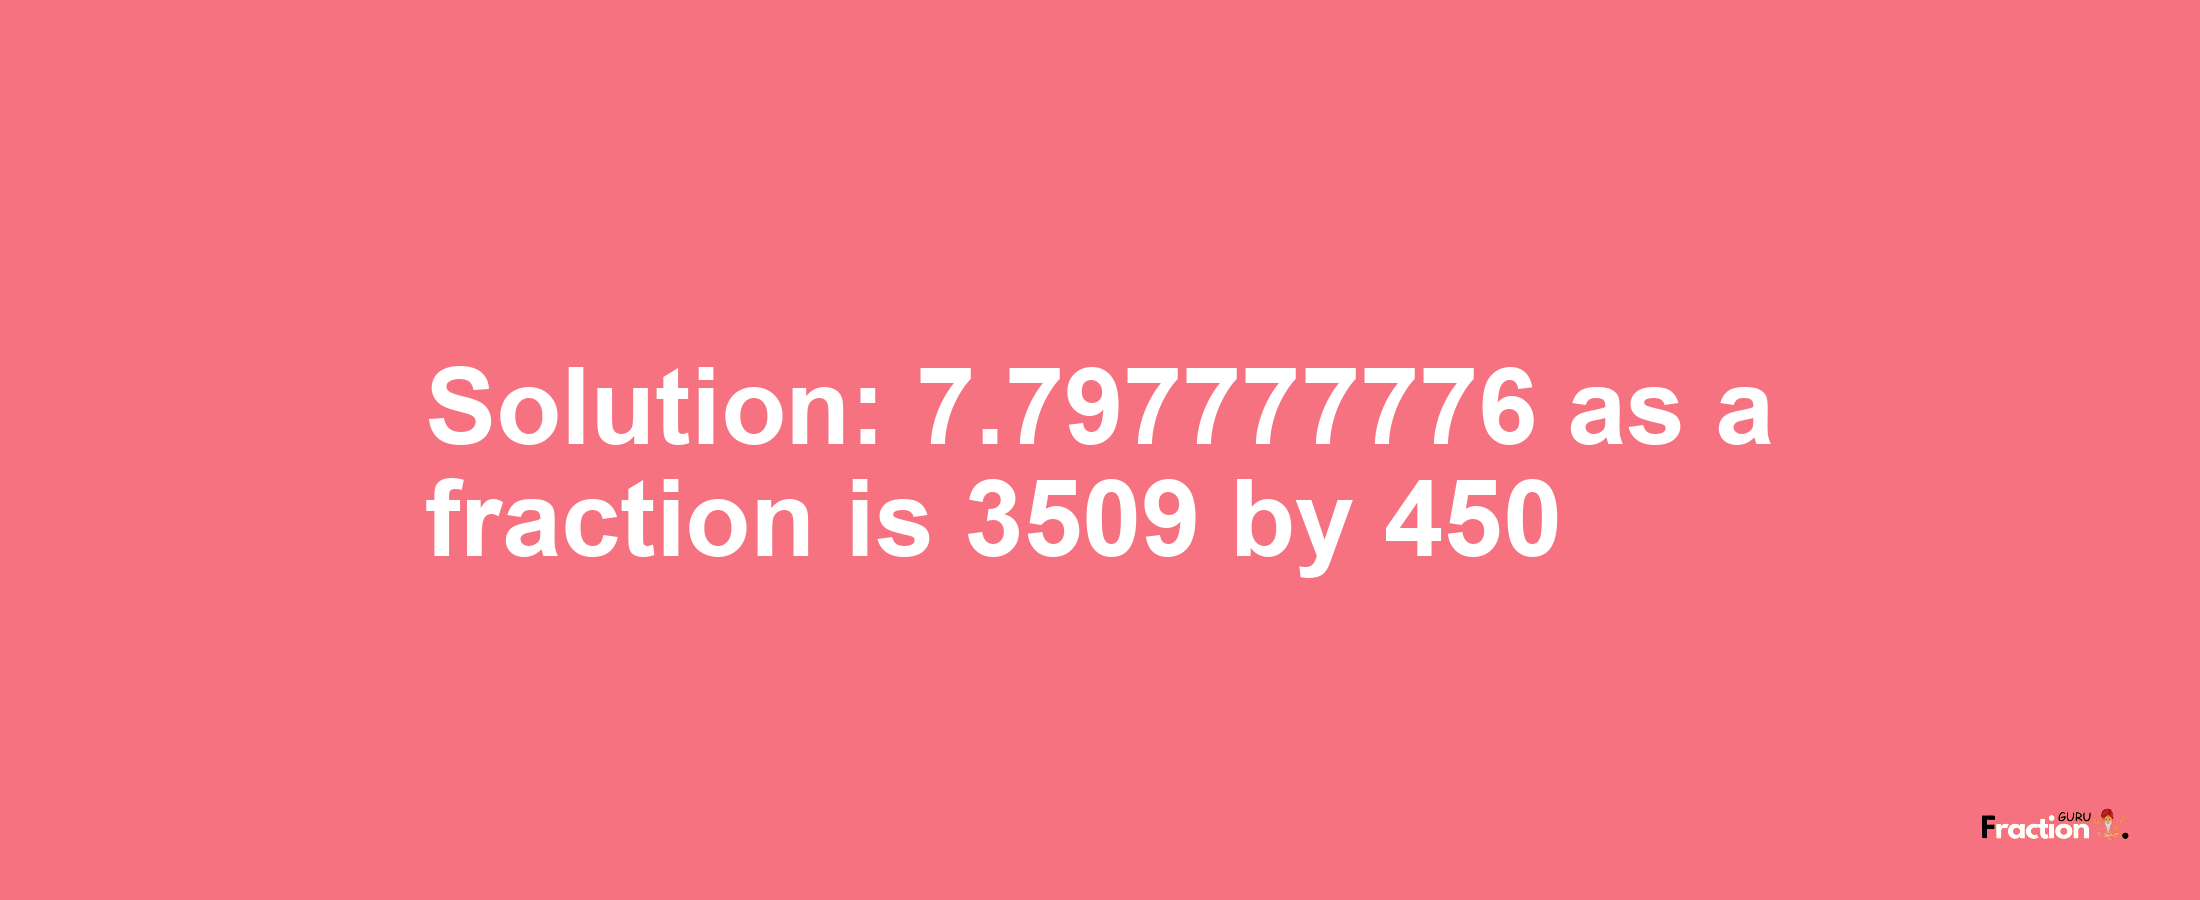 Solution:7.797777776 as a fraction is 3509/450